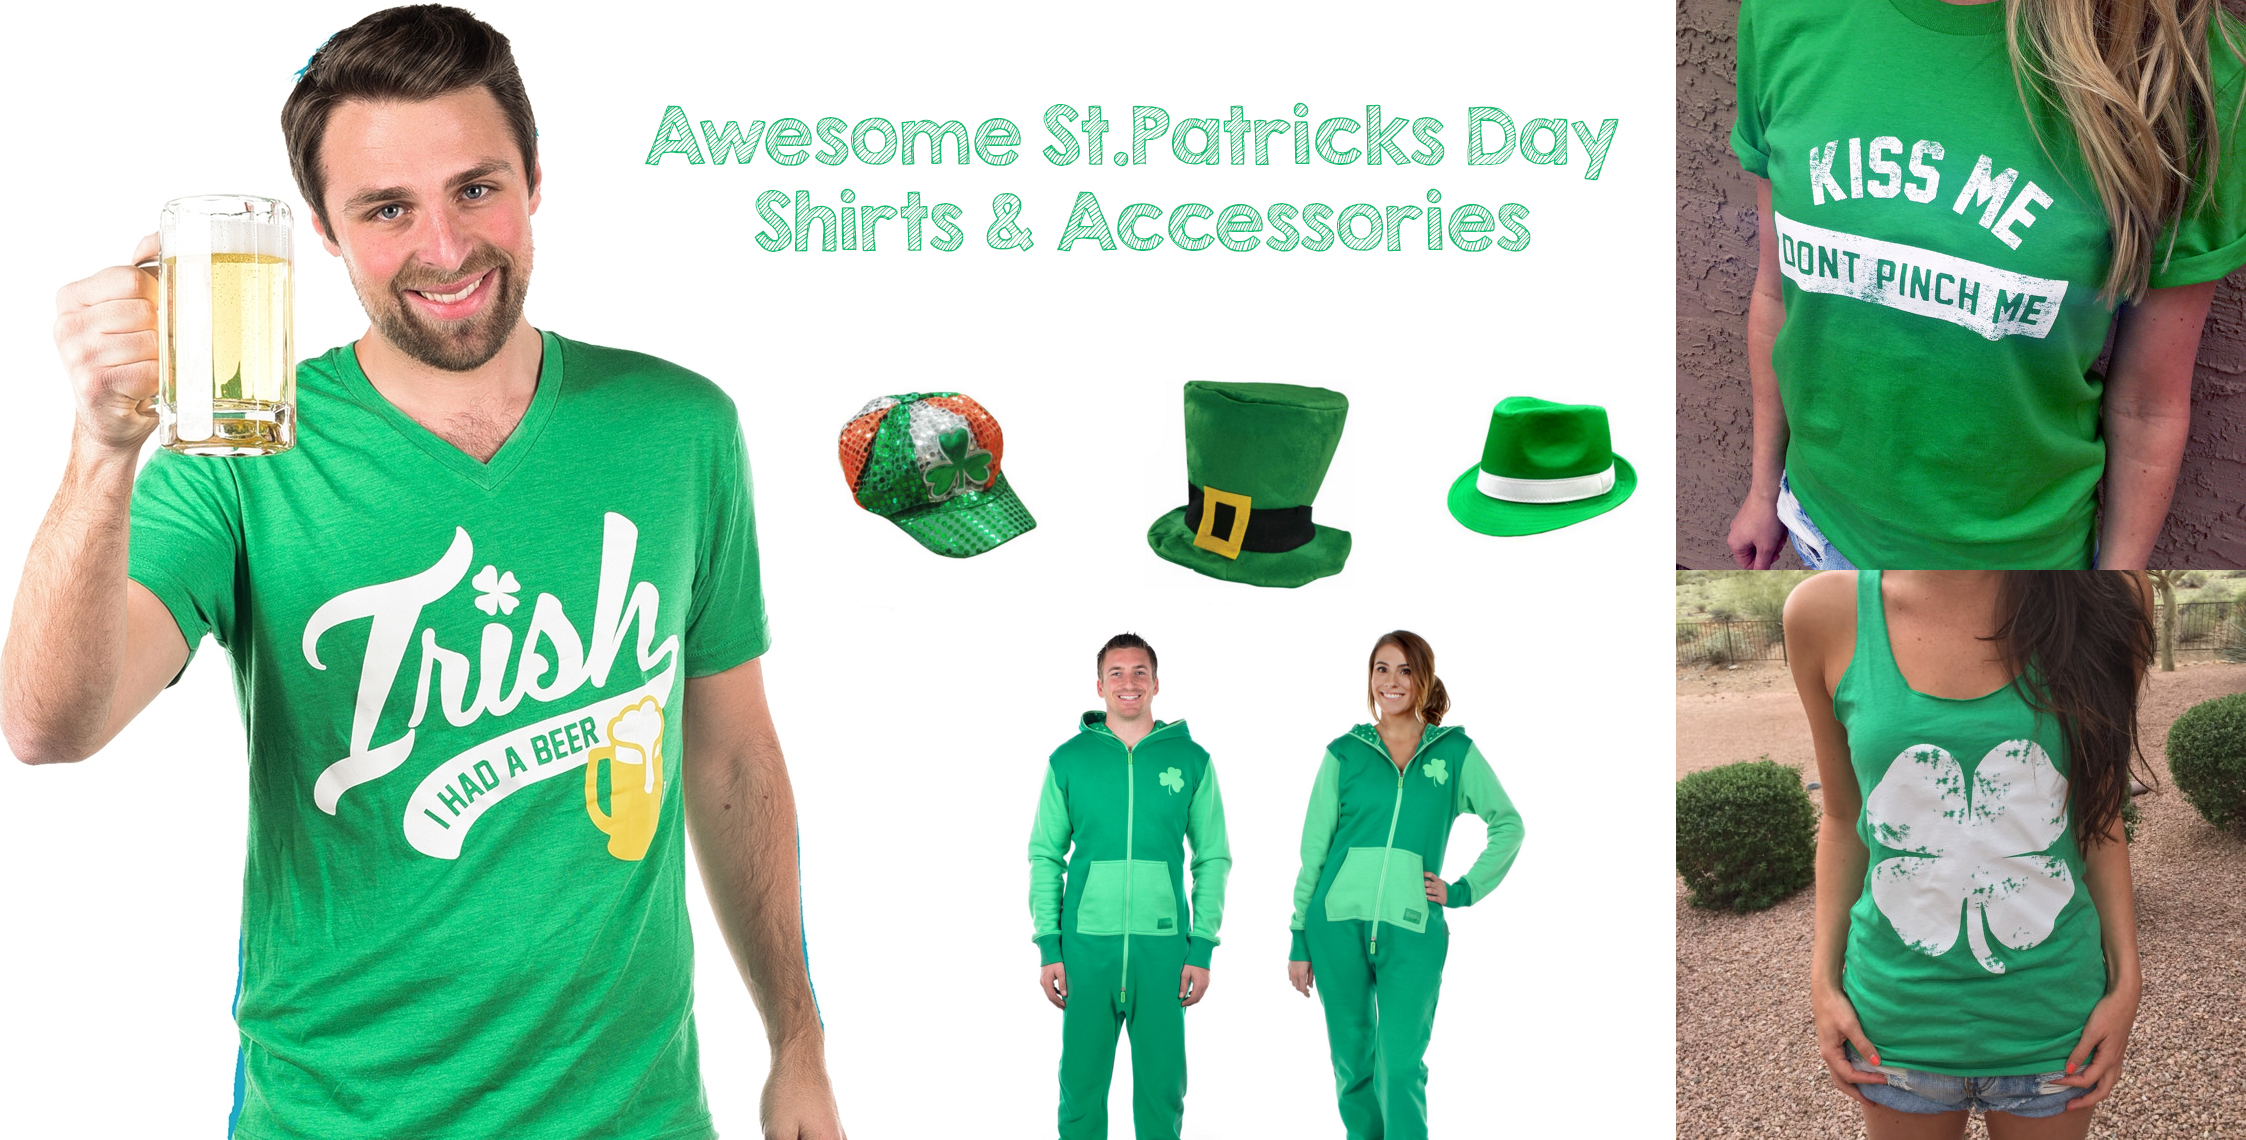 Awesome St.Patricks Day Shirts & Accessories